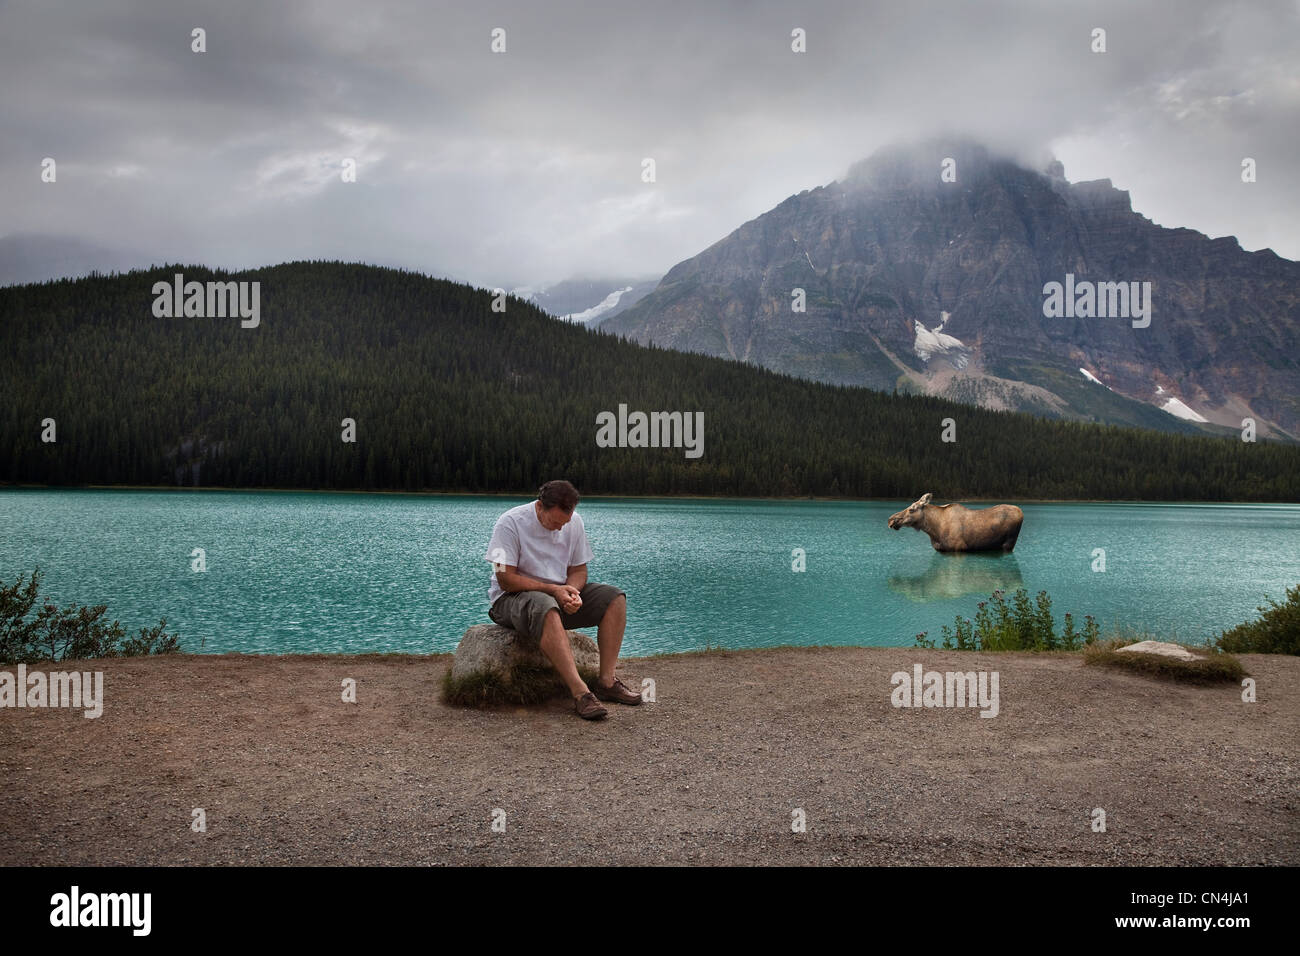 Man and moose in Banff National Park, Alberta, Canada Stock Photo